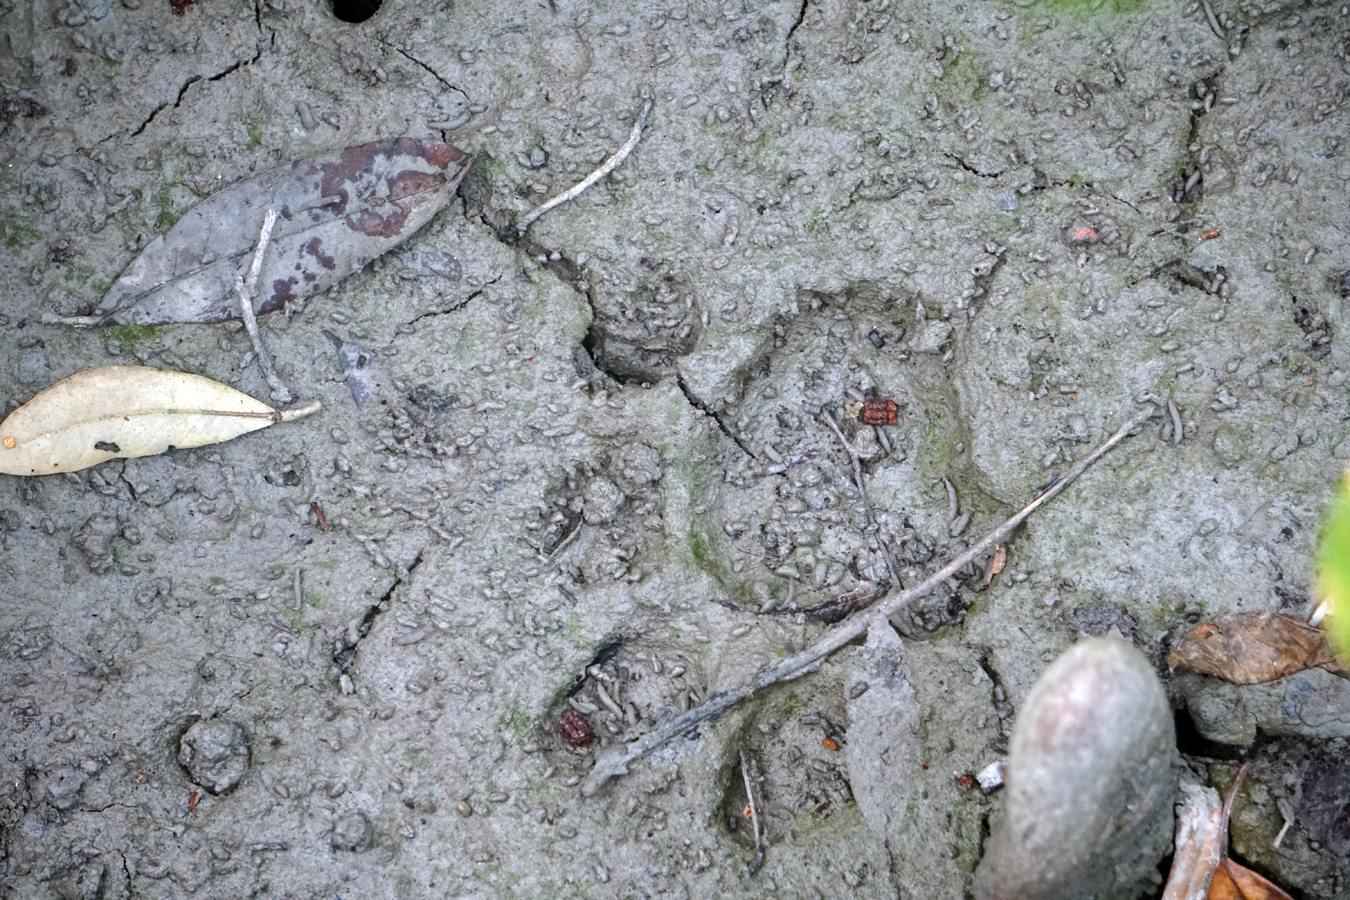 Fresh Tiger footprint in Harbaria Eco Tourism Center